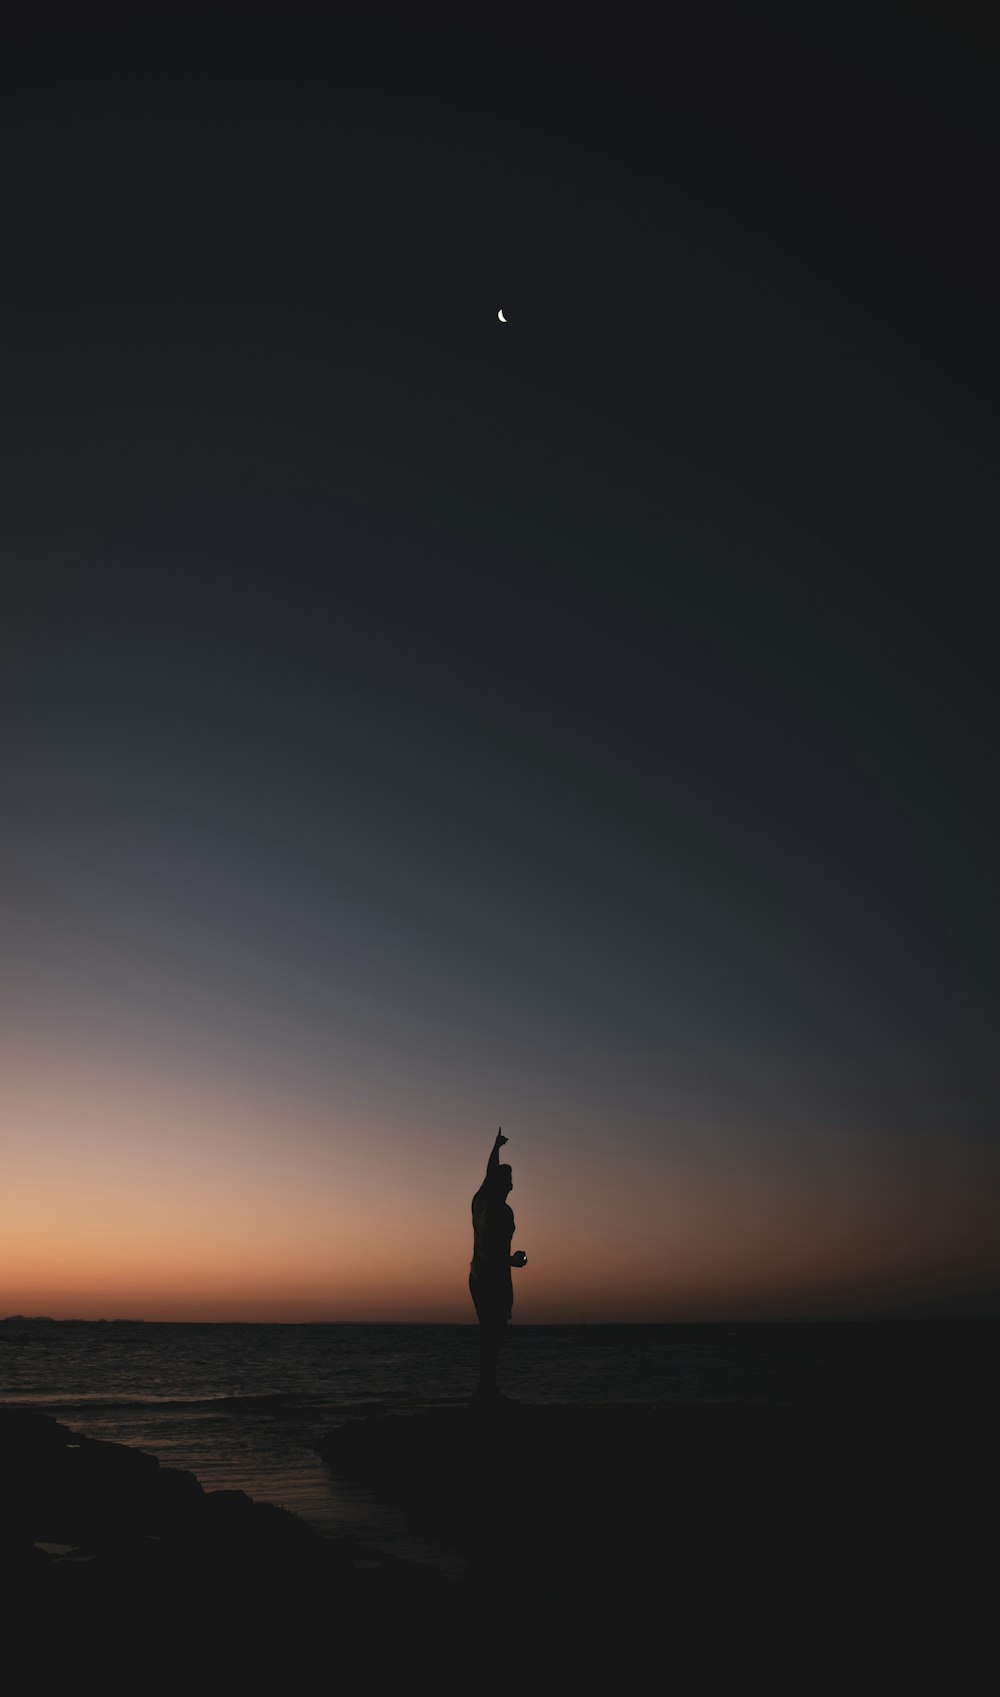 a silhouette of a person standing on a beach at sunset